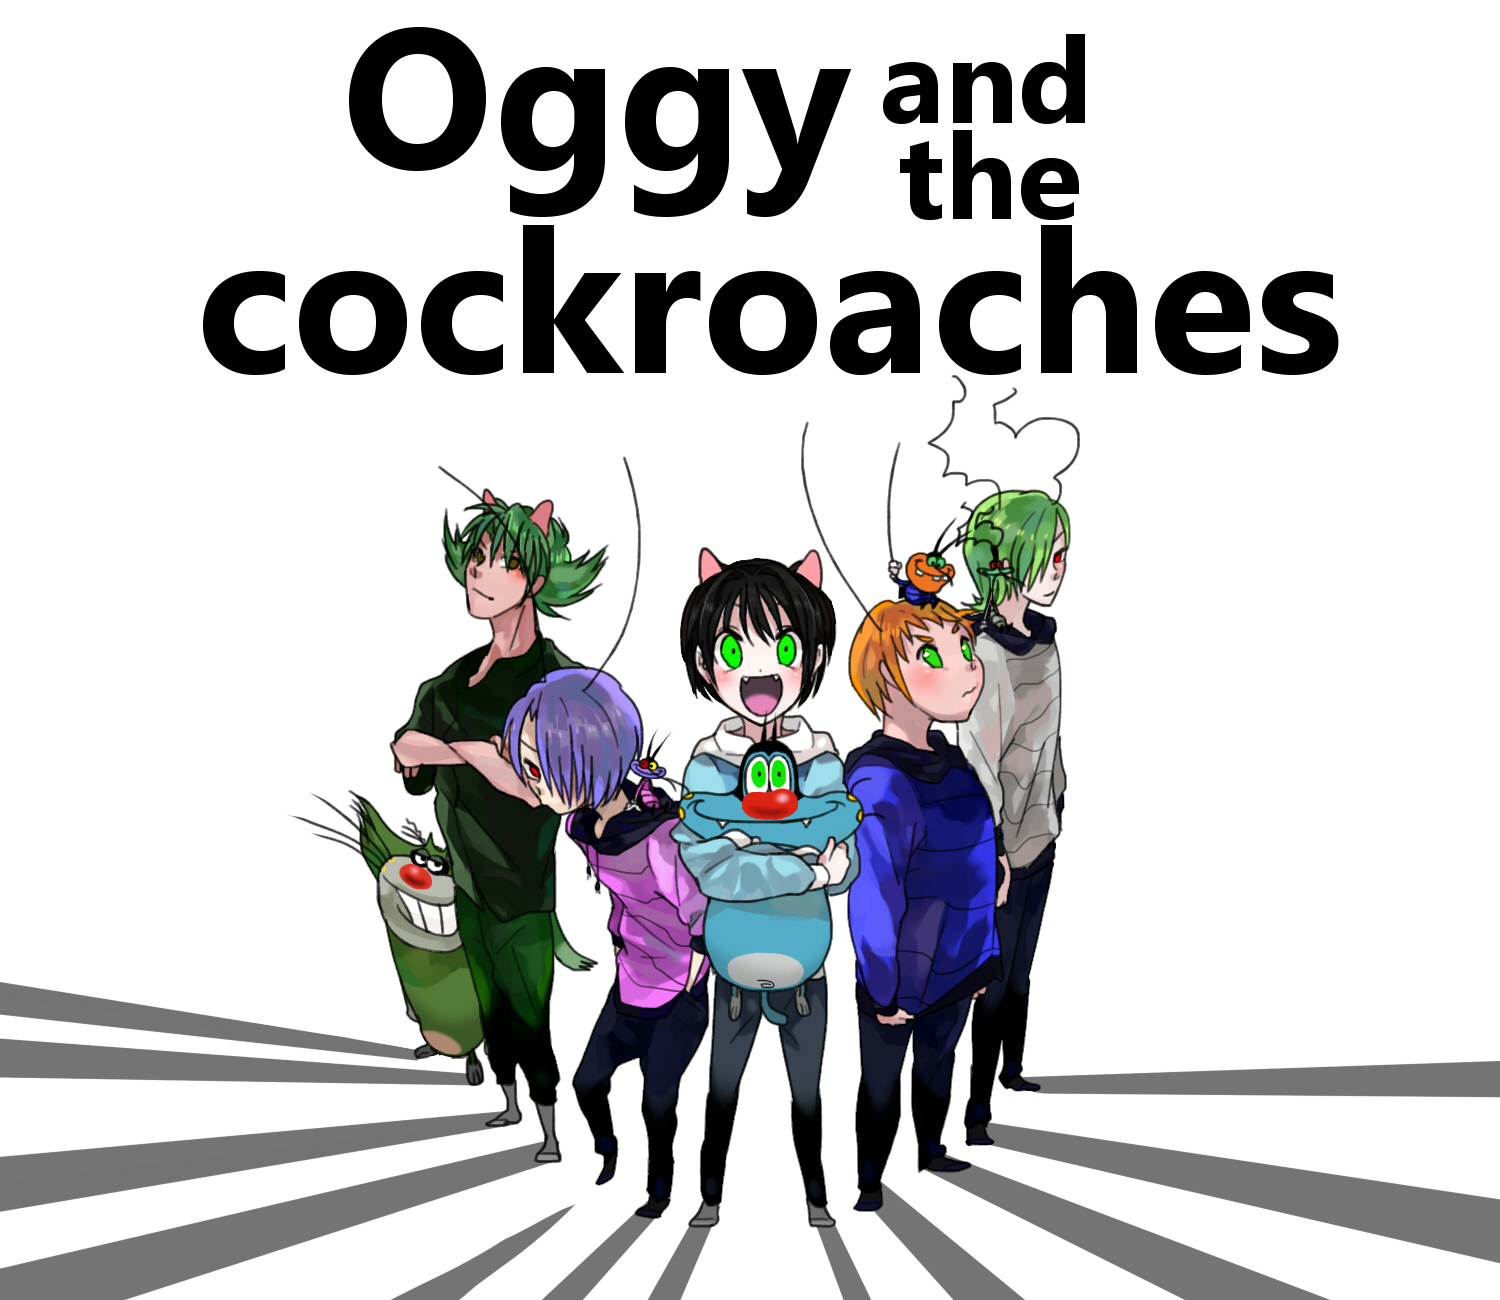 Oggy and the cockroaches by kogerou on DeviantArt